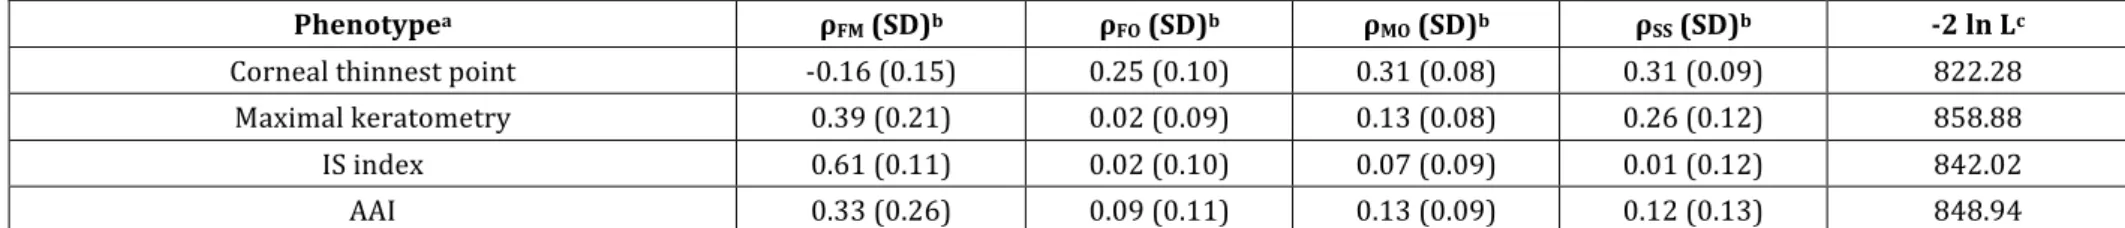 Table 4:  Maximum likelihood estimates of familial correlations for the corneal thinnest point, maximal keratometry, I-S index and AAI  using the class D regressive model 